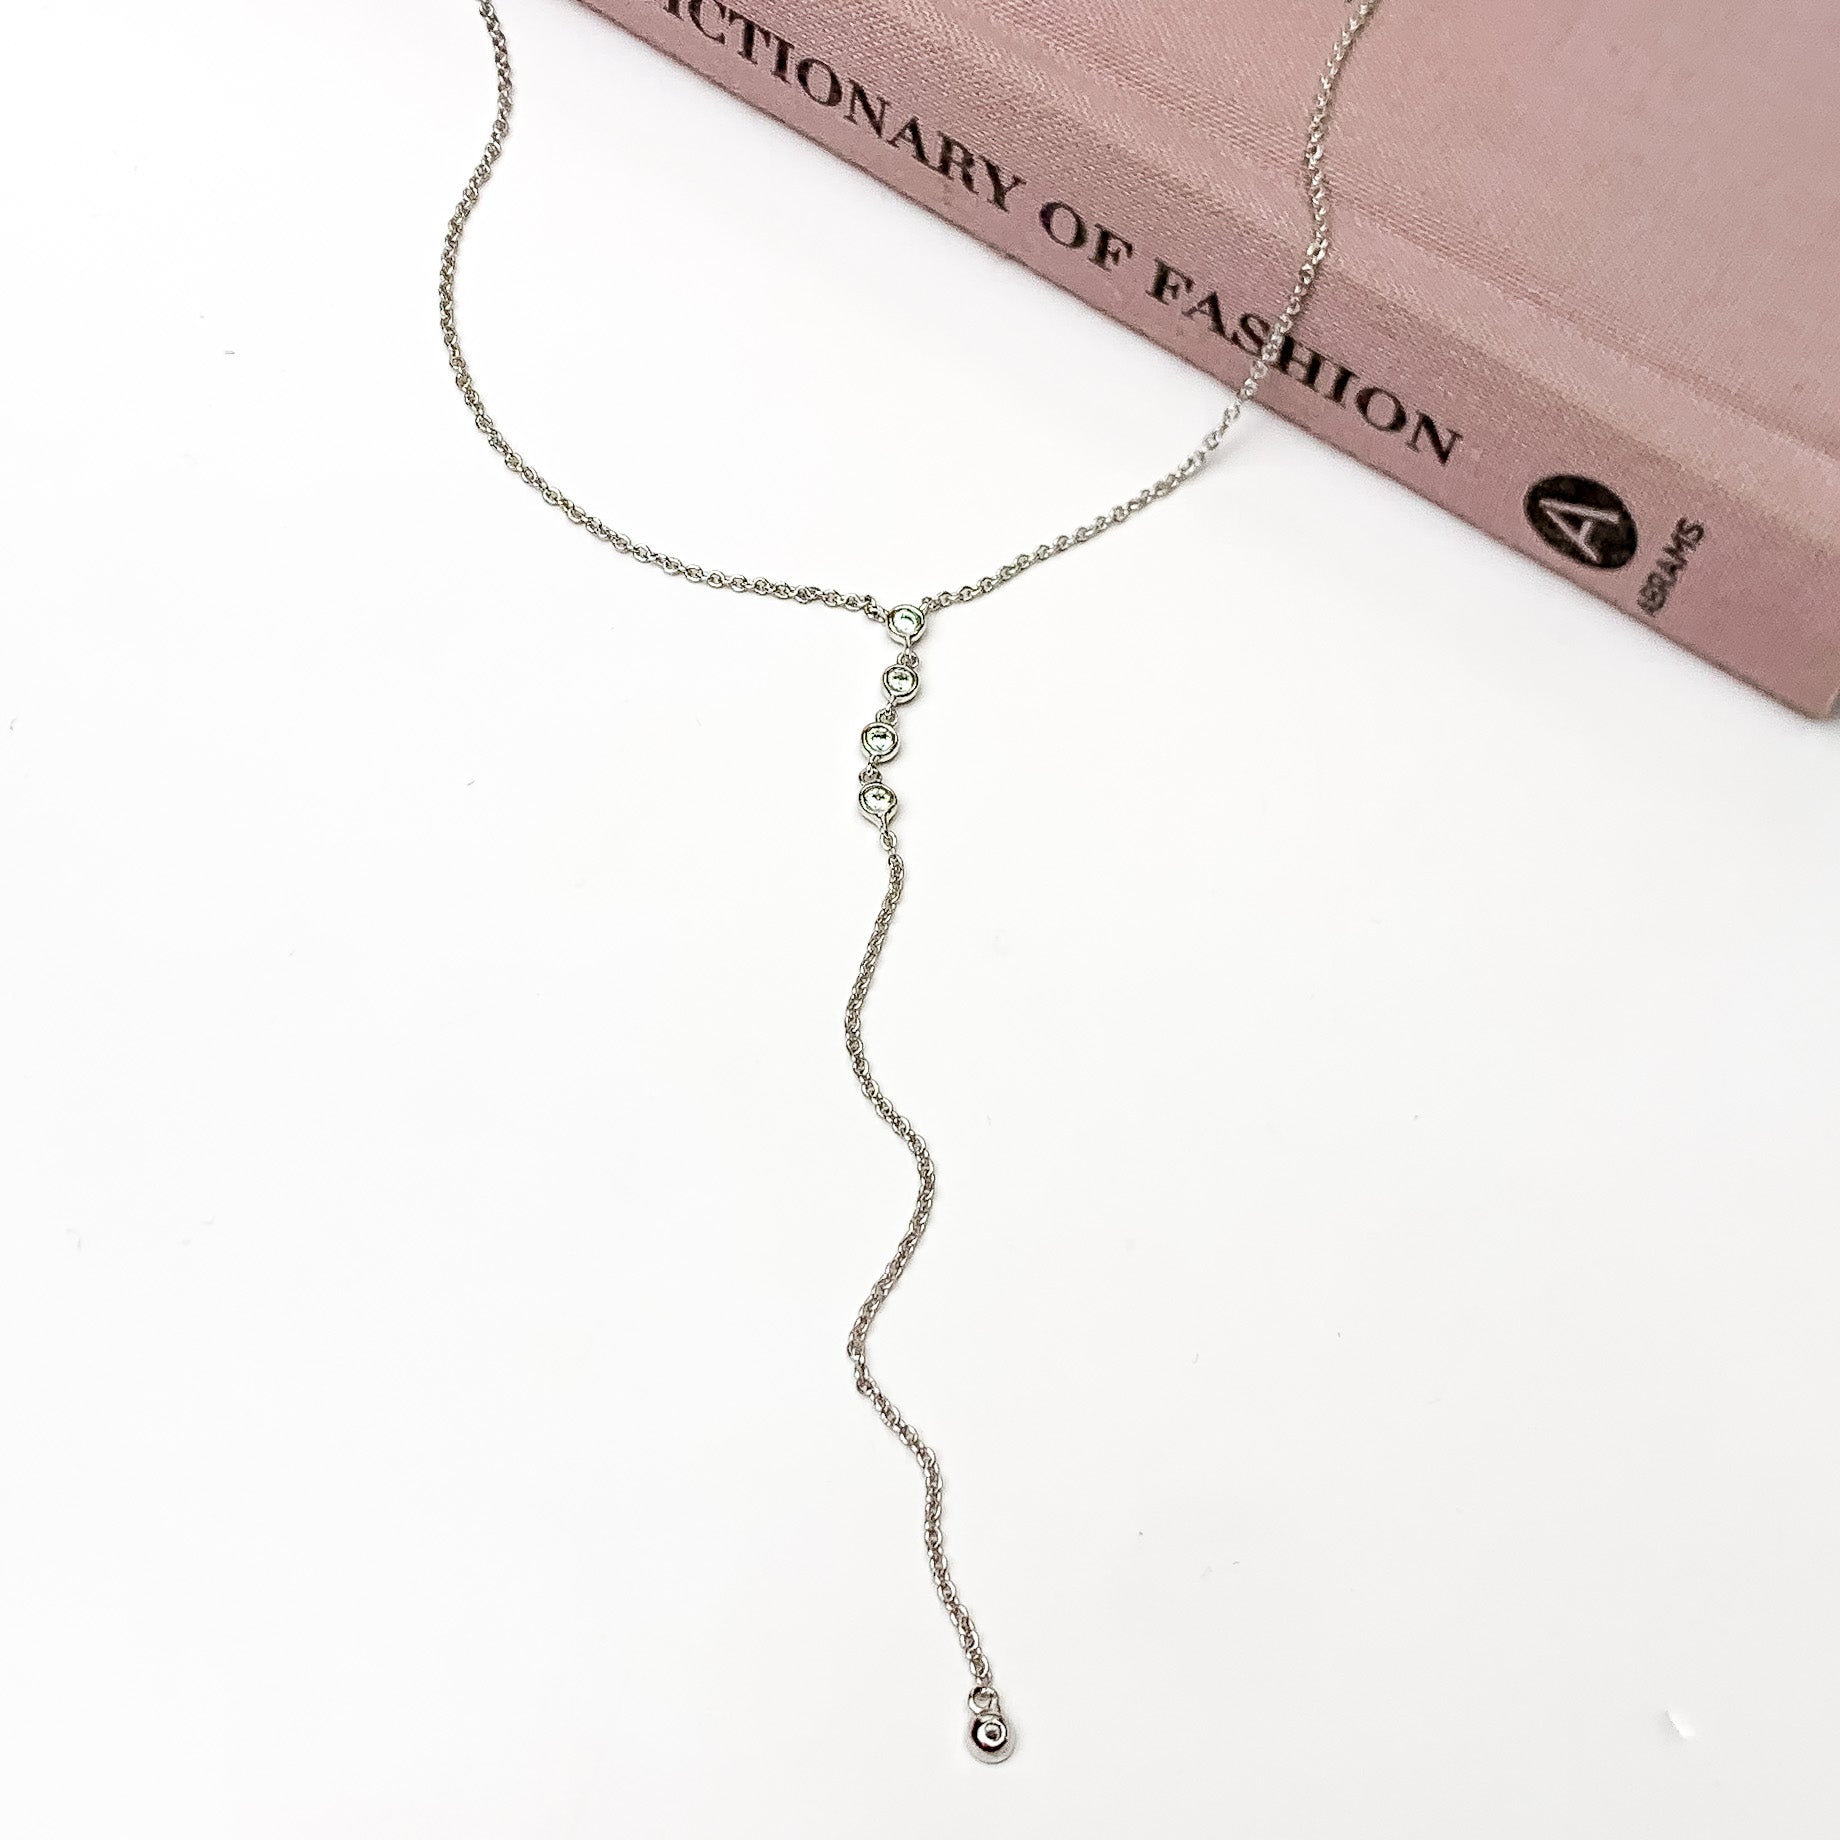 Silver Tone Y necklace With Clear Crystal Accessory. Pictured on a white background with the necklace laying on a closed book.